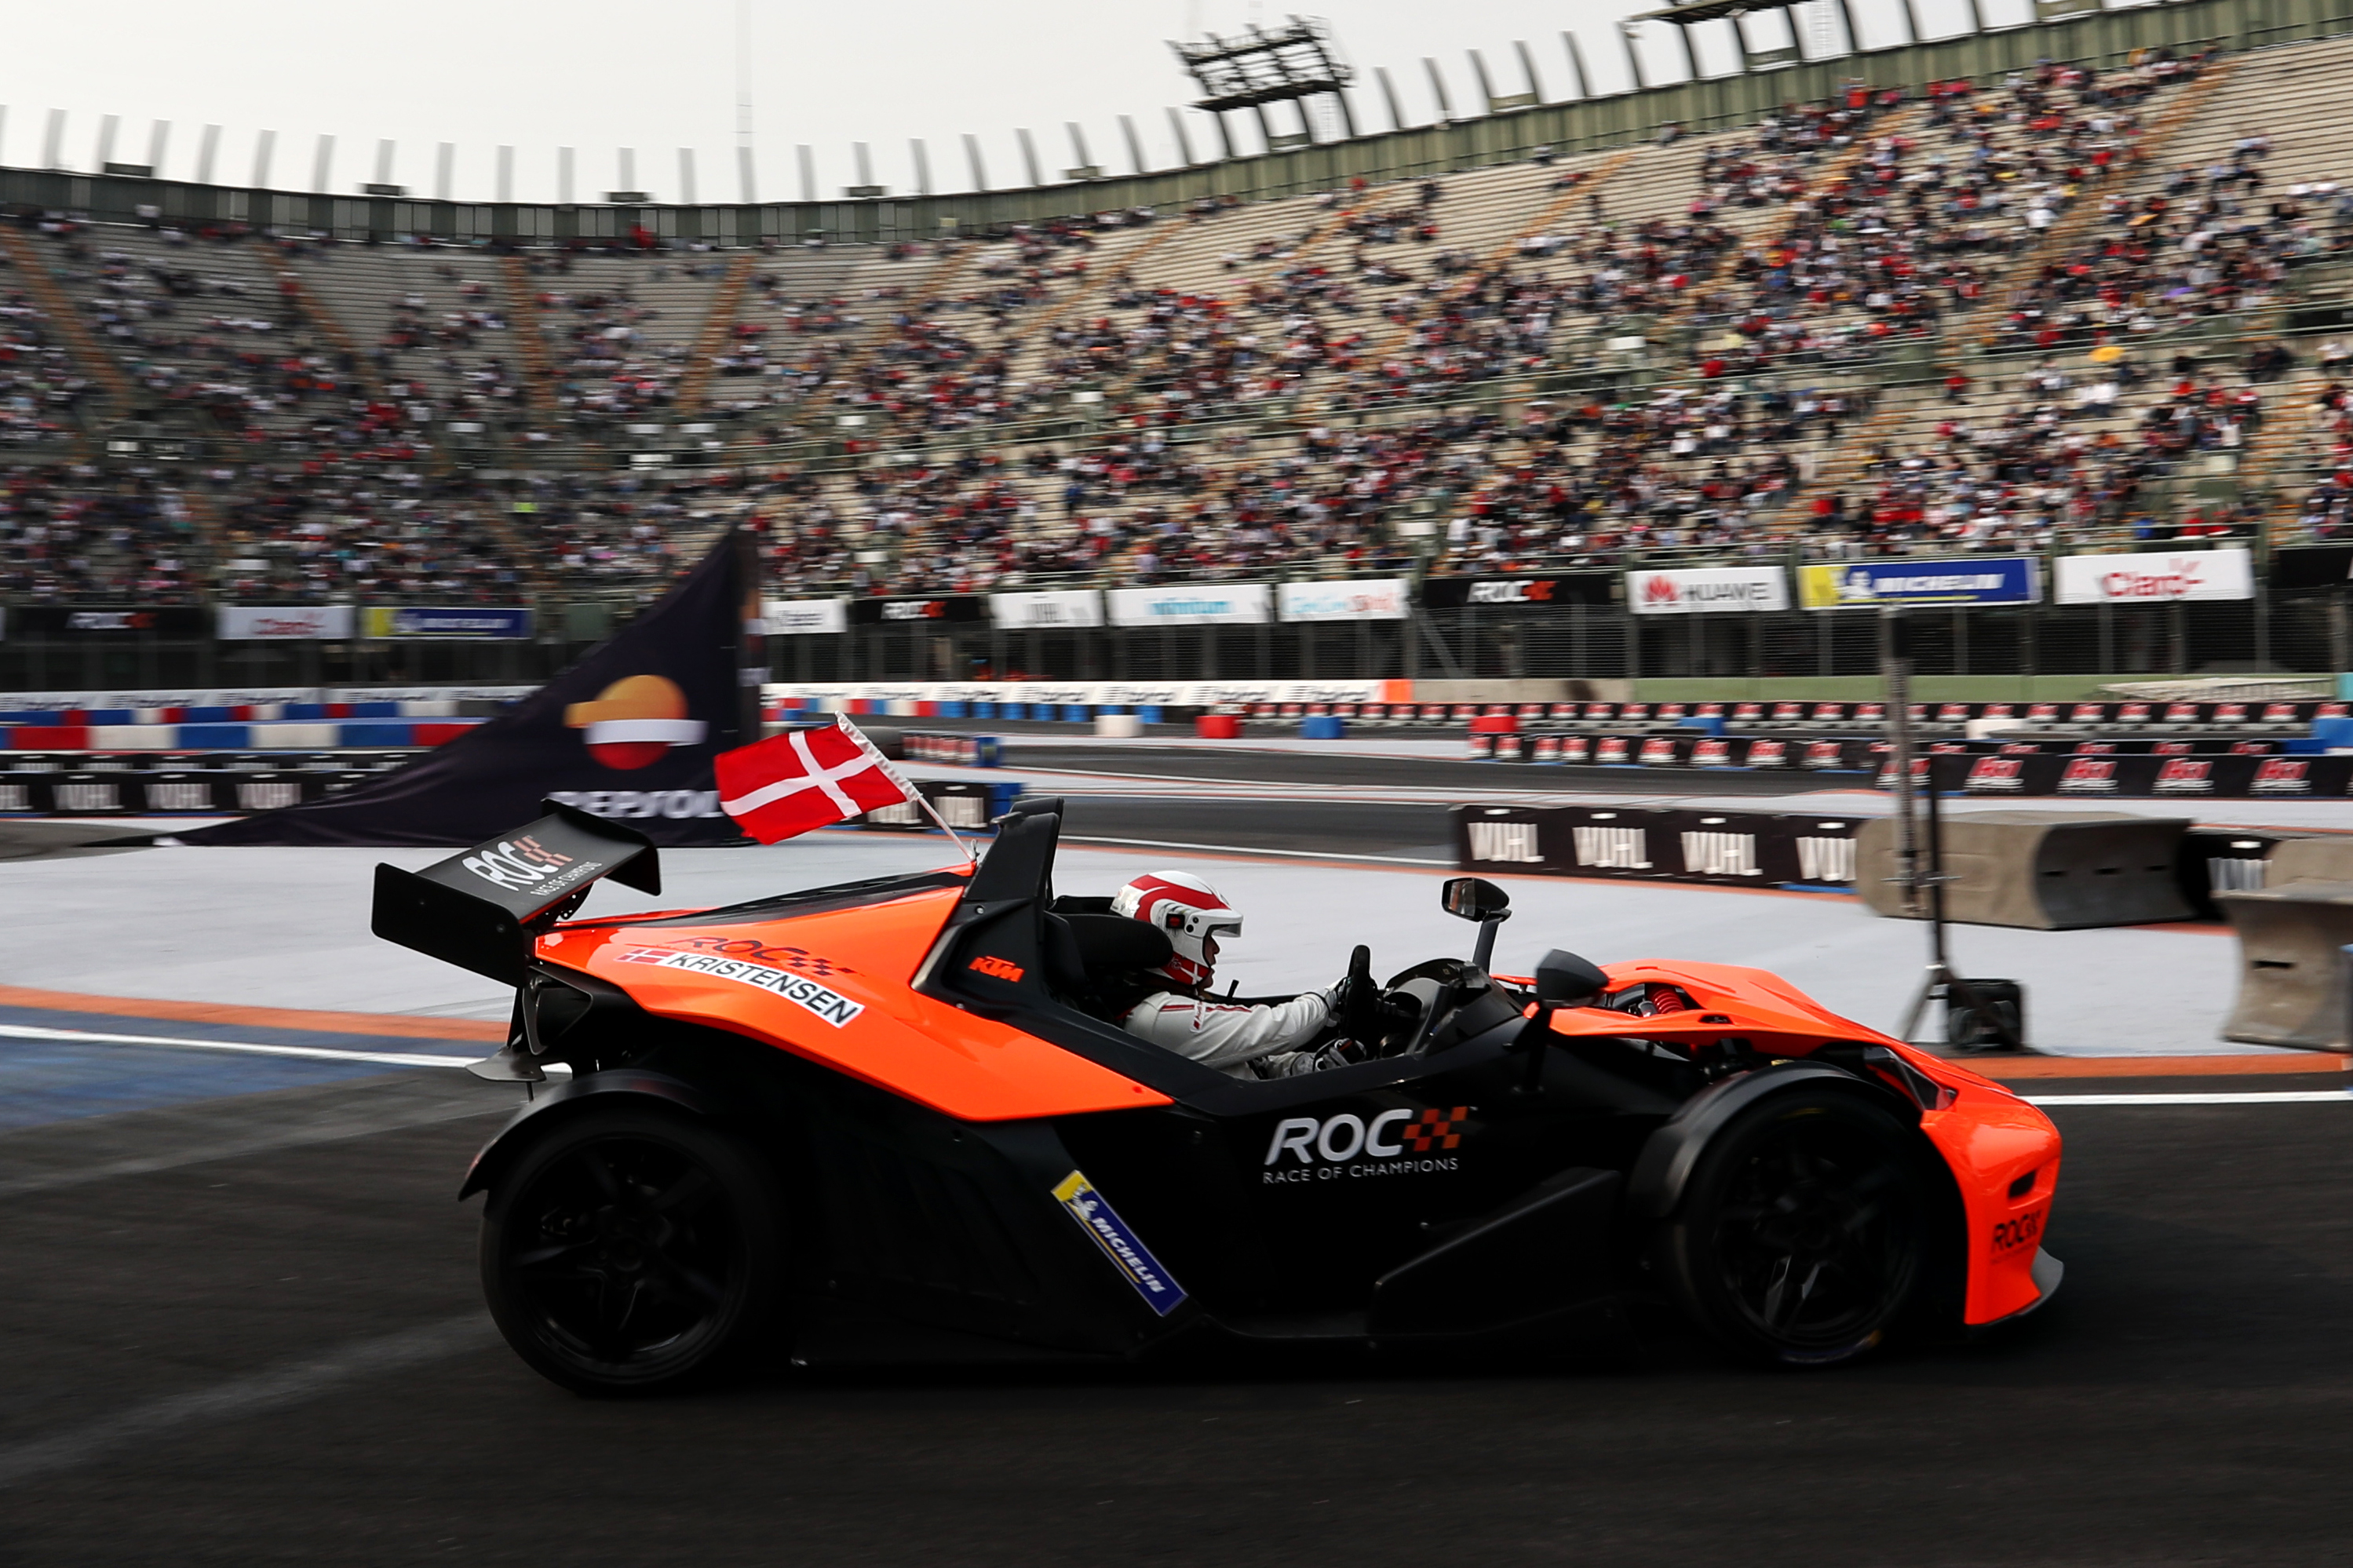 tom_kristensen_dnk_of_team_nordic_driving_the_ktm_x-bow_comp_r_during_the_roc_nations_cup_on_saturday_19_january_2019_at_foro_sol_mexico_city_mexico_0700.JPG